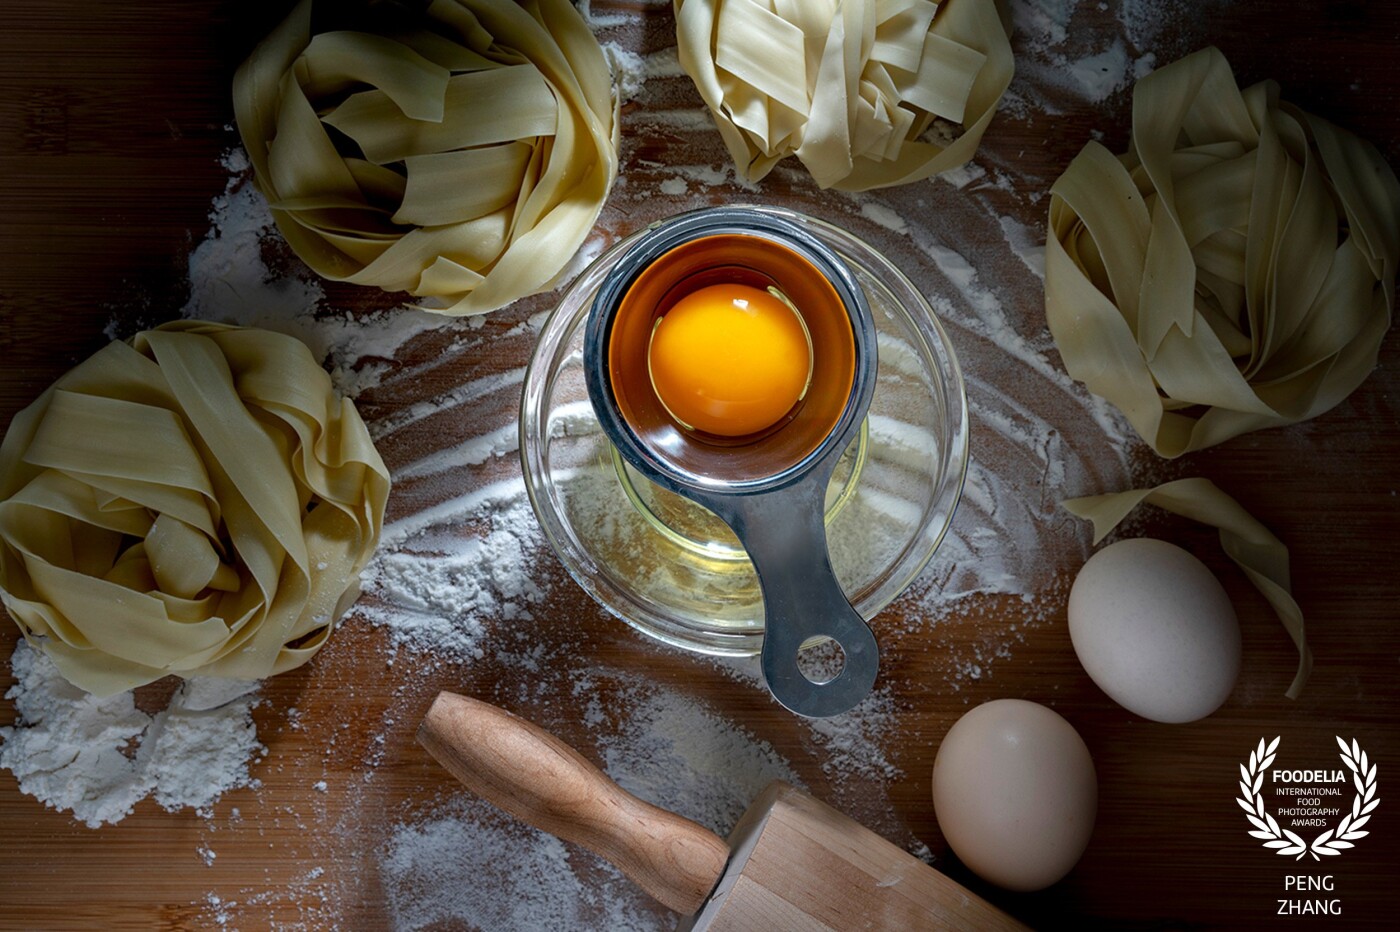 Noodle is one of my favorite food, also the main cuisine theme I photograph.  When I took this picture, I just had bought a new small studio lamp, with which I made a slight beam of light especially focus on the egg yolk,  wishing to strengthen the silky texture of the fresh egg.  Of course, the flour, noodles and the rolling pin on cutting board, all together tell a simple story about how traditional noodles are made.